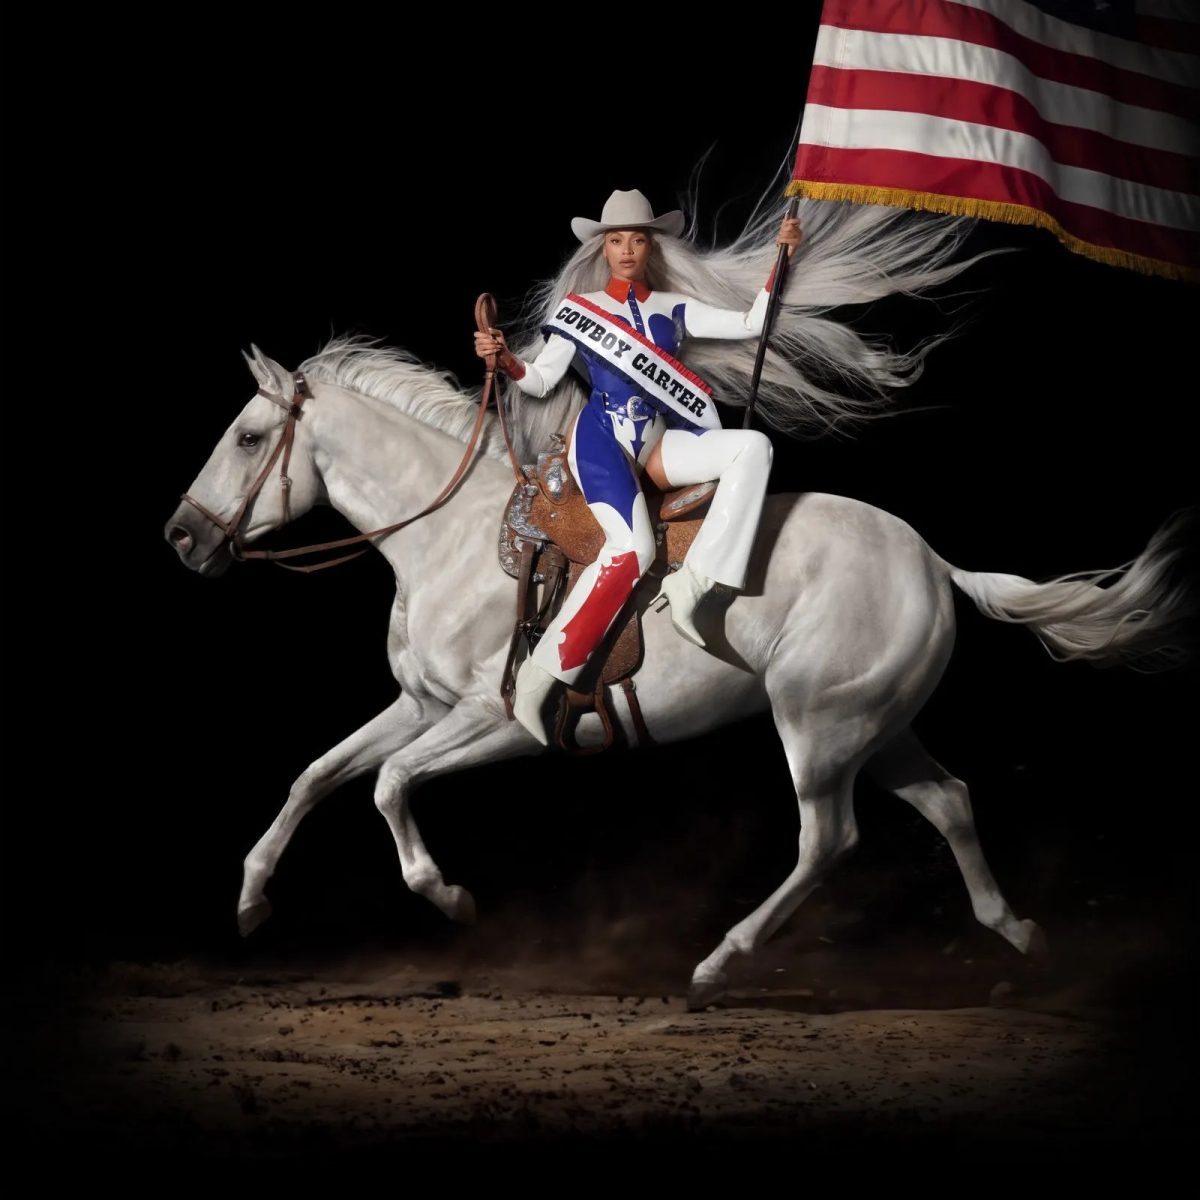 The country theme in Beyoncés new album Cowboy Carter is very apparent in the album cover of her riding a horse holding an American flag.